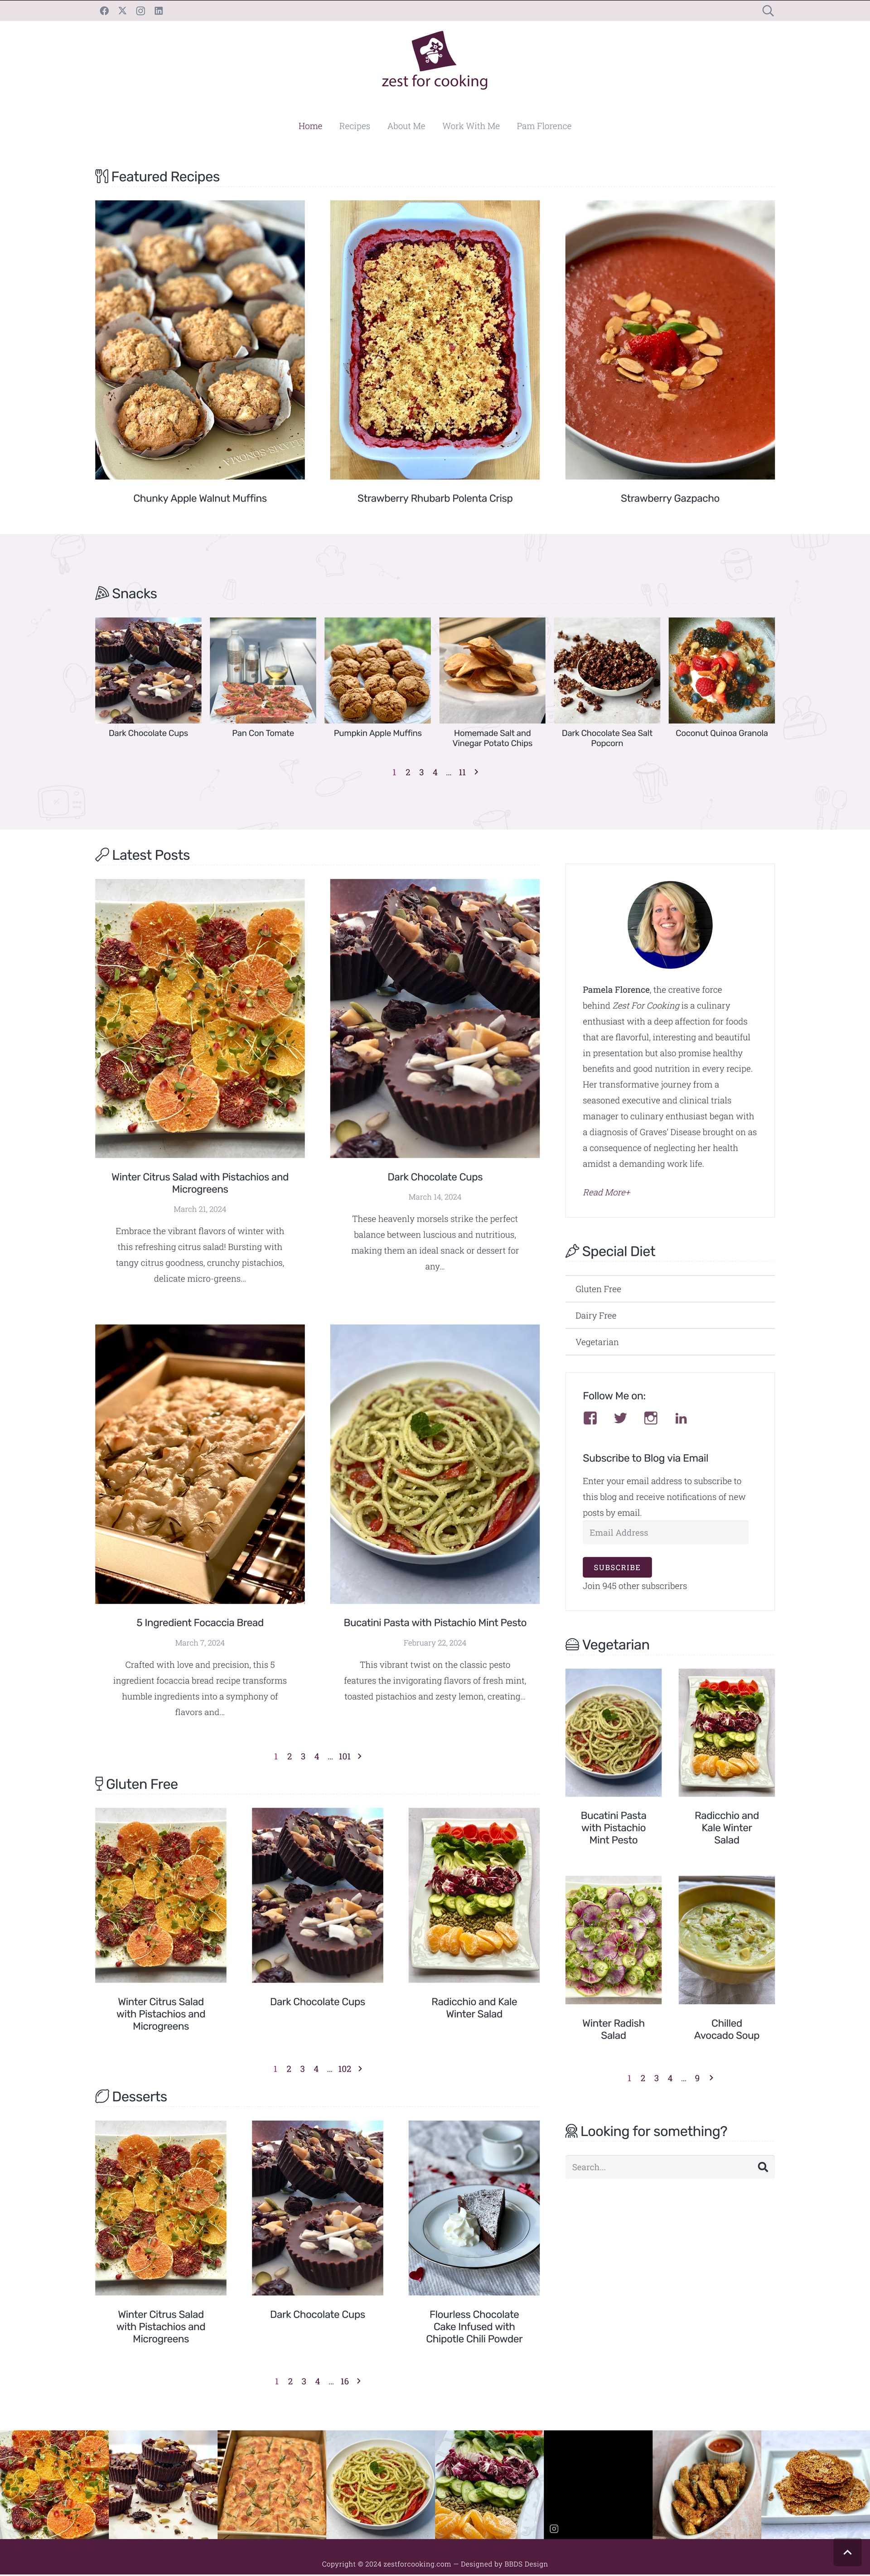 Revamping a Food Blogger's Website - Zest for Cooking